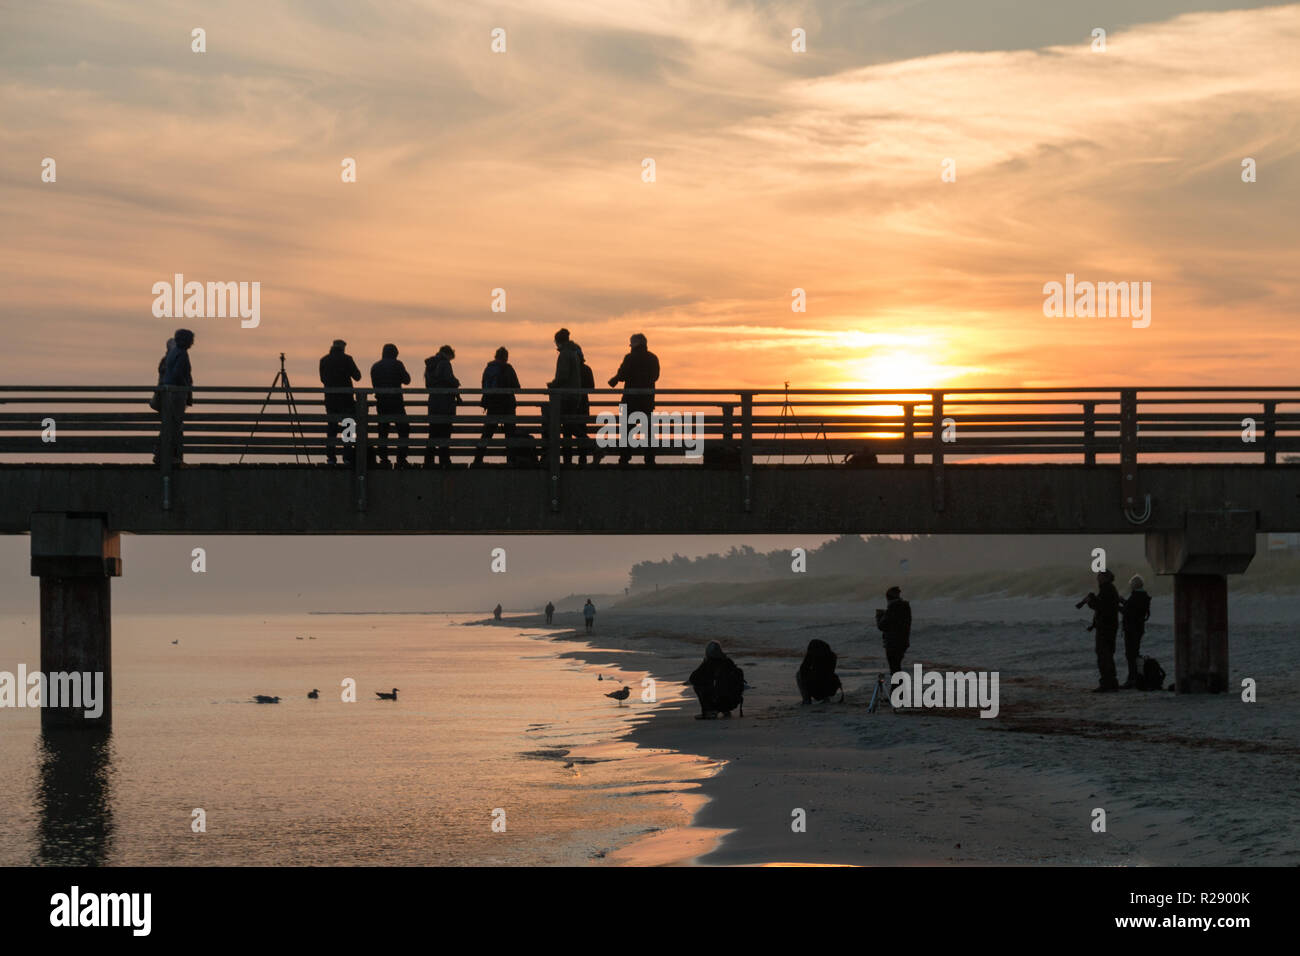 Prerow, Germany - October 10, 2018: View of photographers photographing the sunrise on the beach of Prerow at the Baltic Sea, Germany. Stock Photo